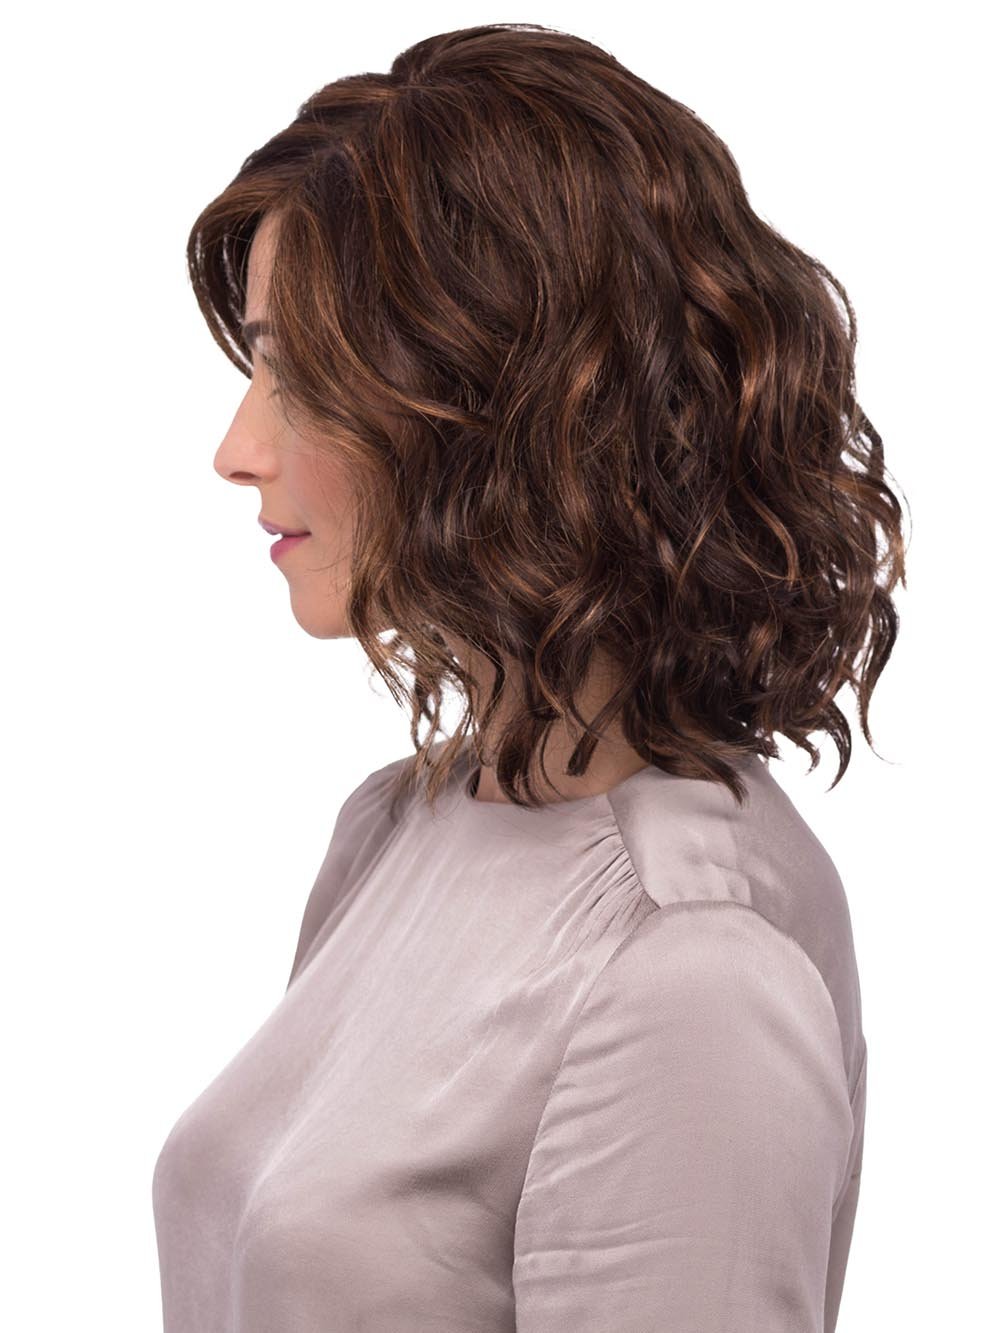 Her lace front creates the most natural hairline, while her monofilament top allows the hair to move freely in any direction